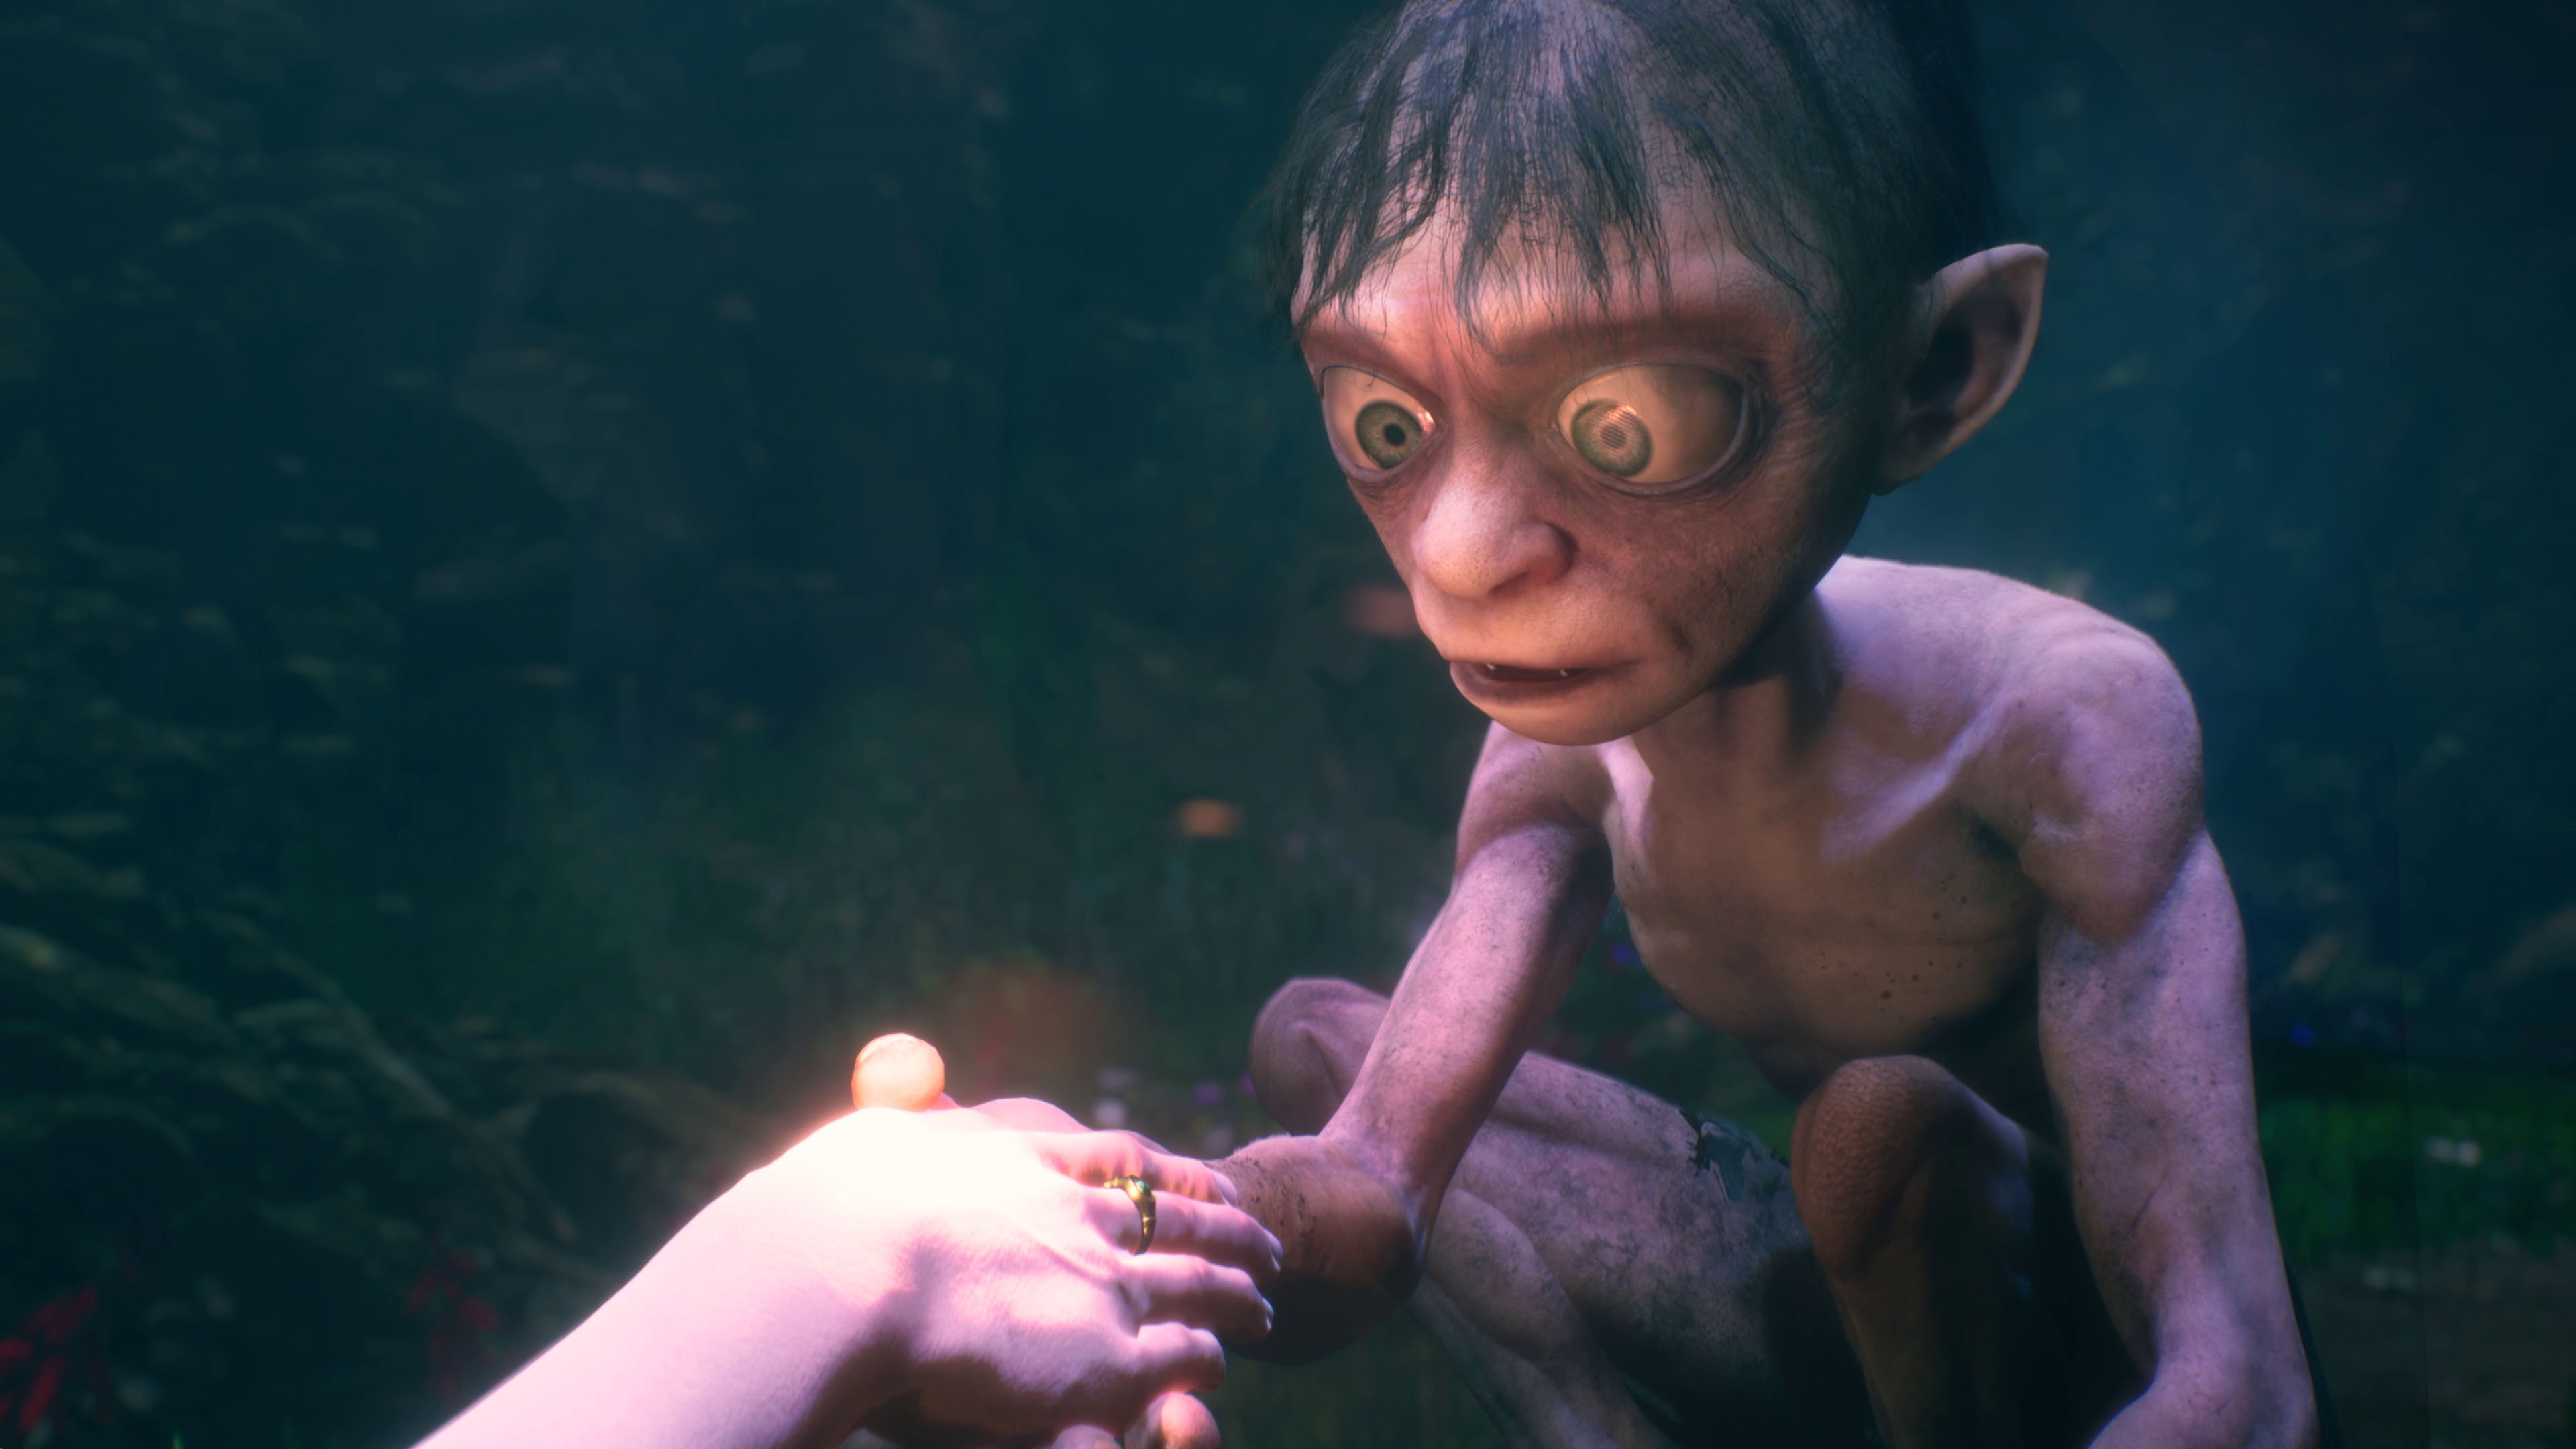 The Lord of the Rings Gollum Teaser Offers First Look at Stealth Adventure